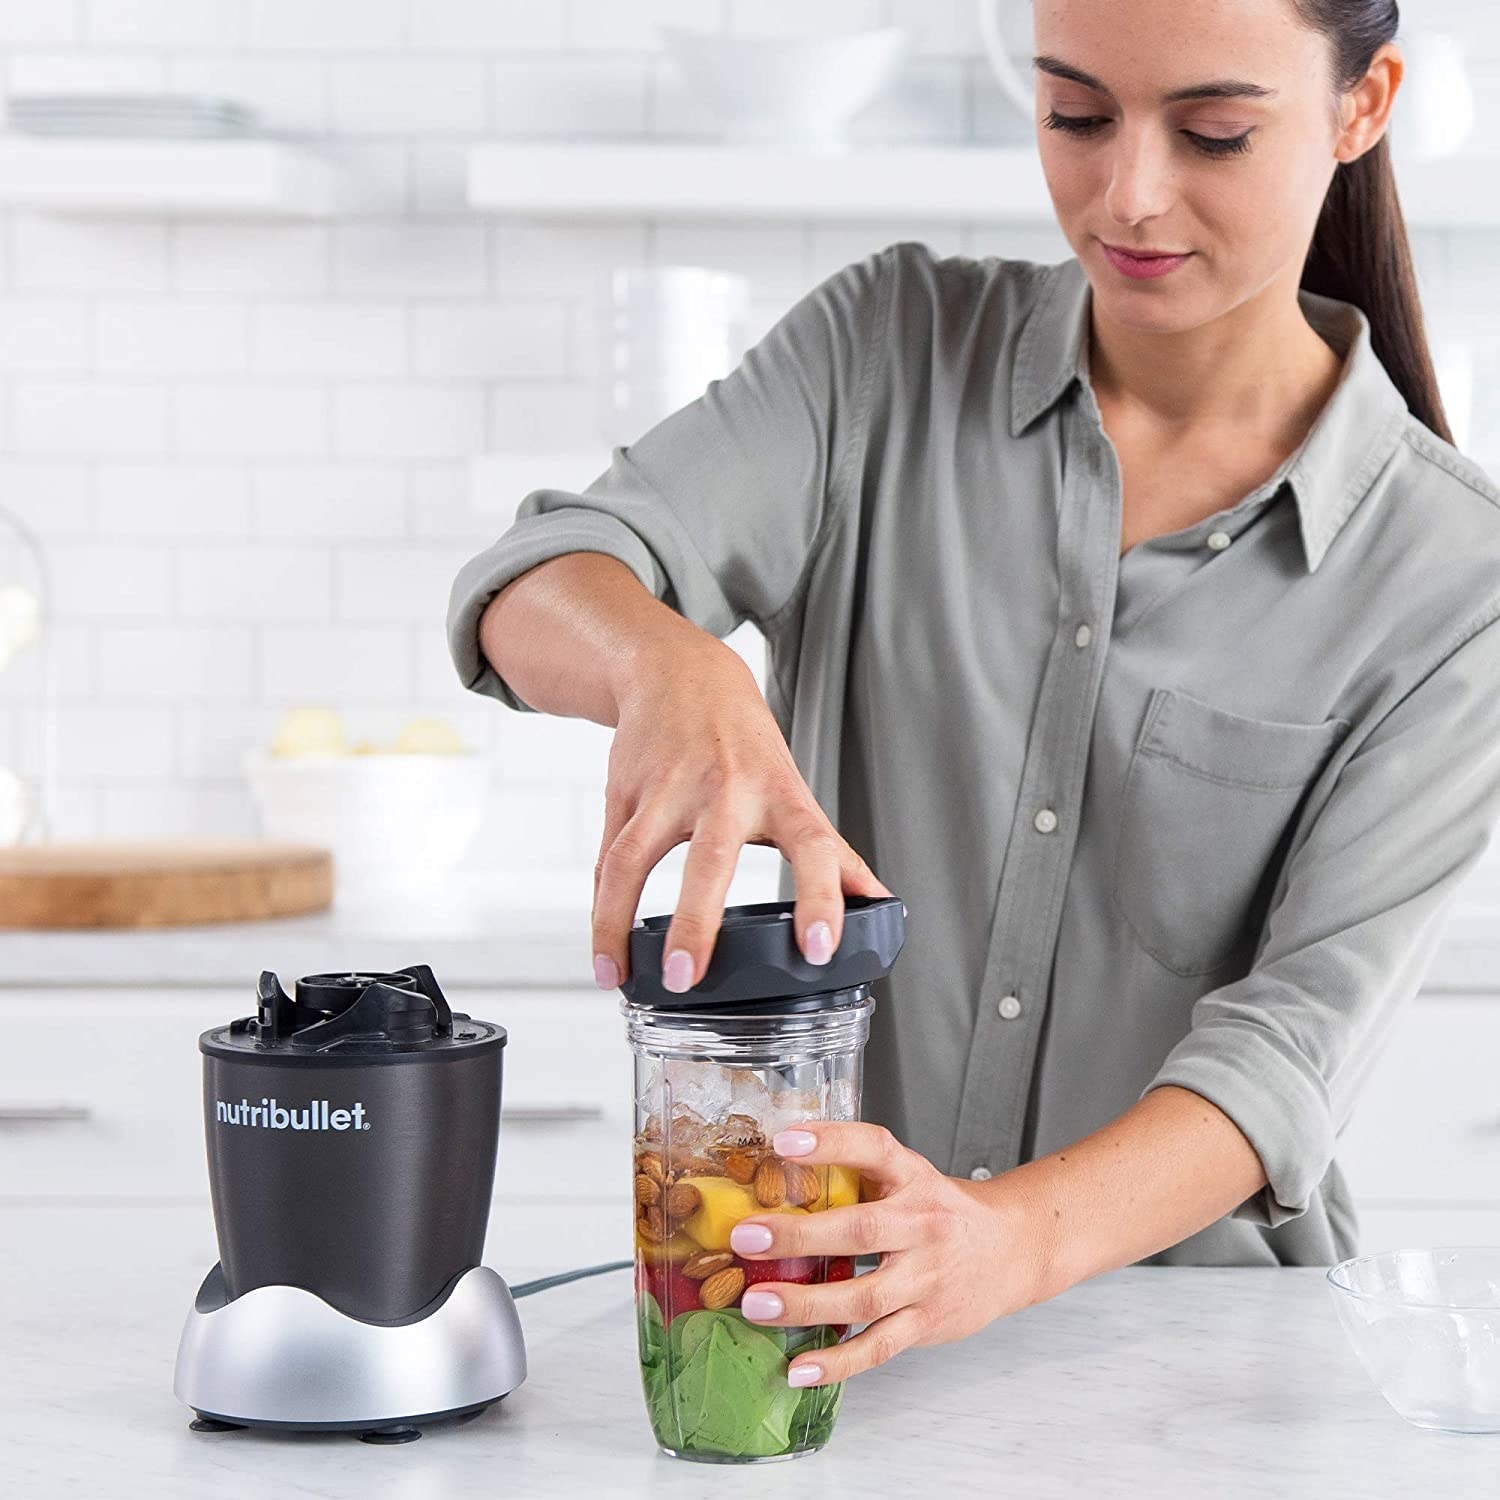 a model fastens a lid onto the nutribullet blender, which is full of almonds, spinach, and fruits